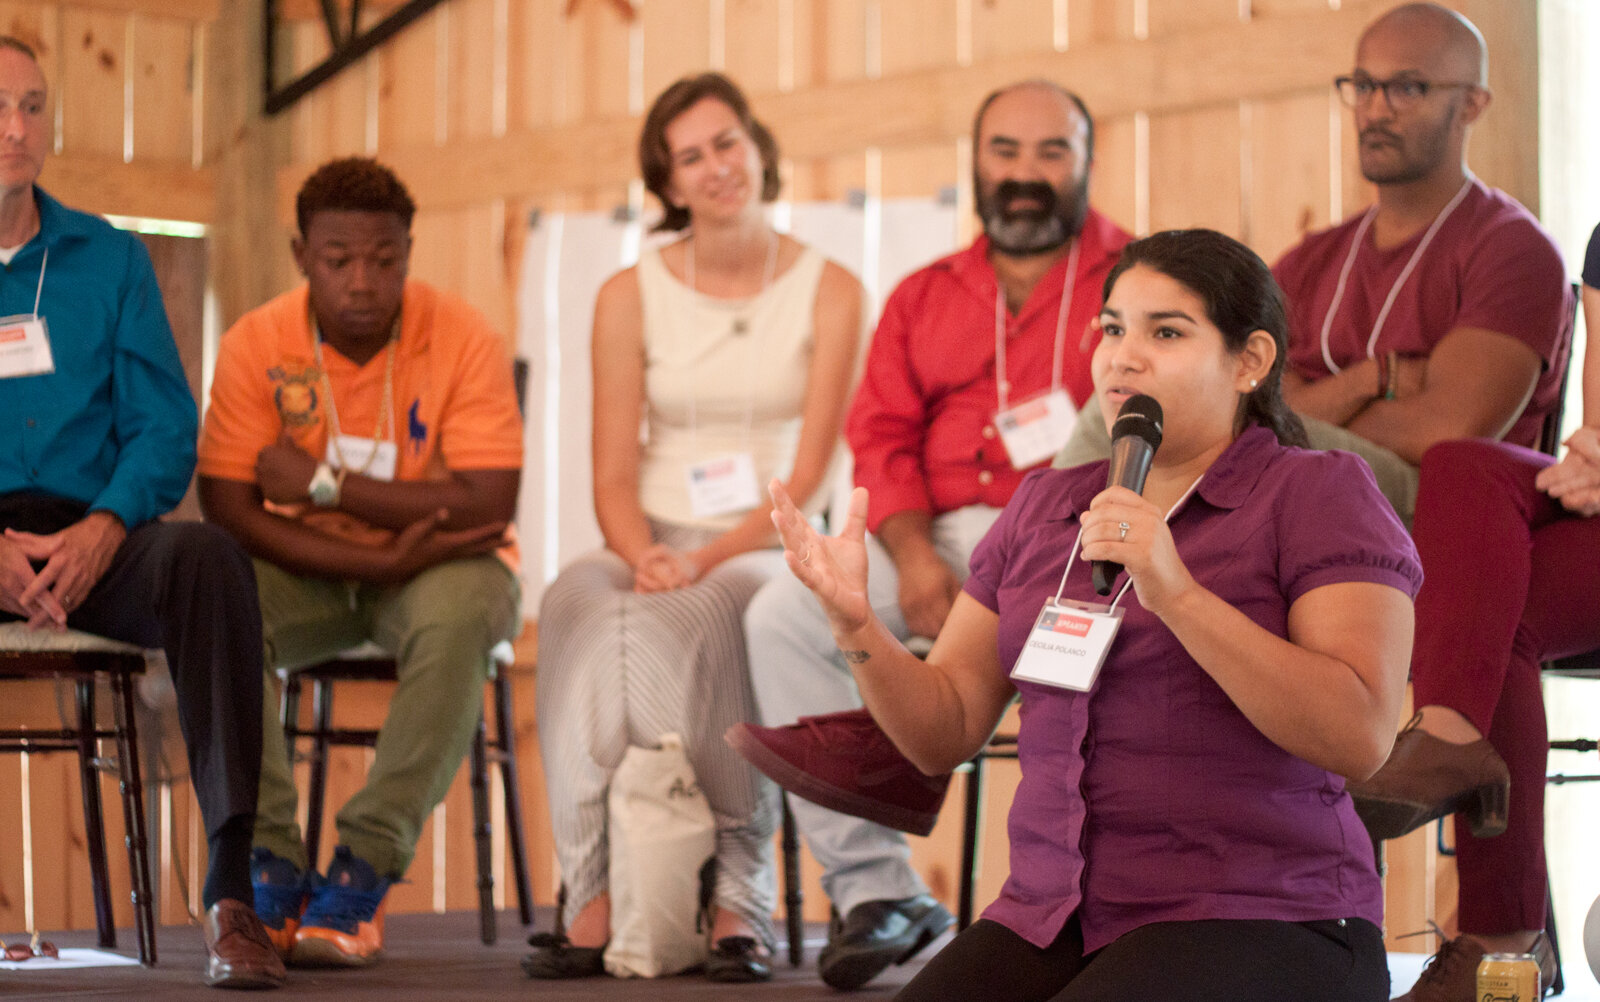  The second day featured gatherings of chefs, policy experts, school nutrition workers, and food activists in an inspiring round-up of innovation in North Carolina's foodways.